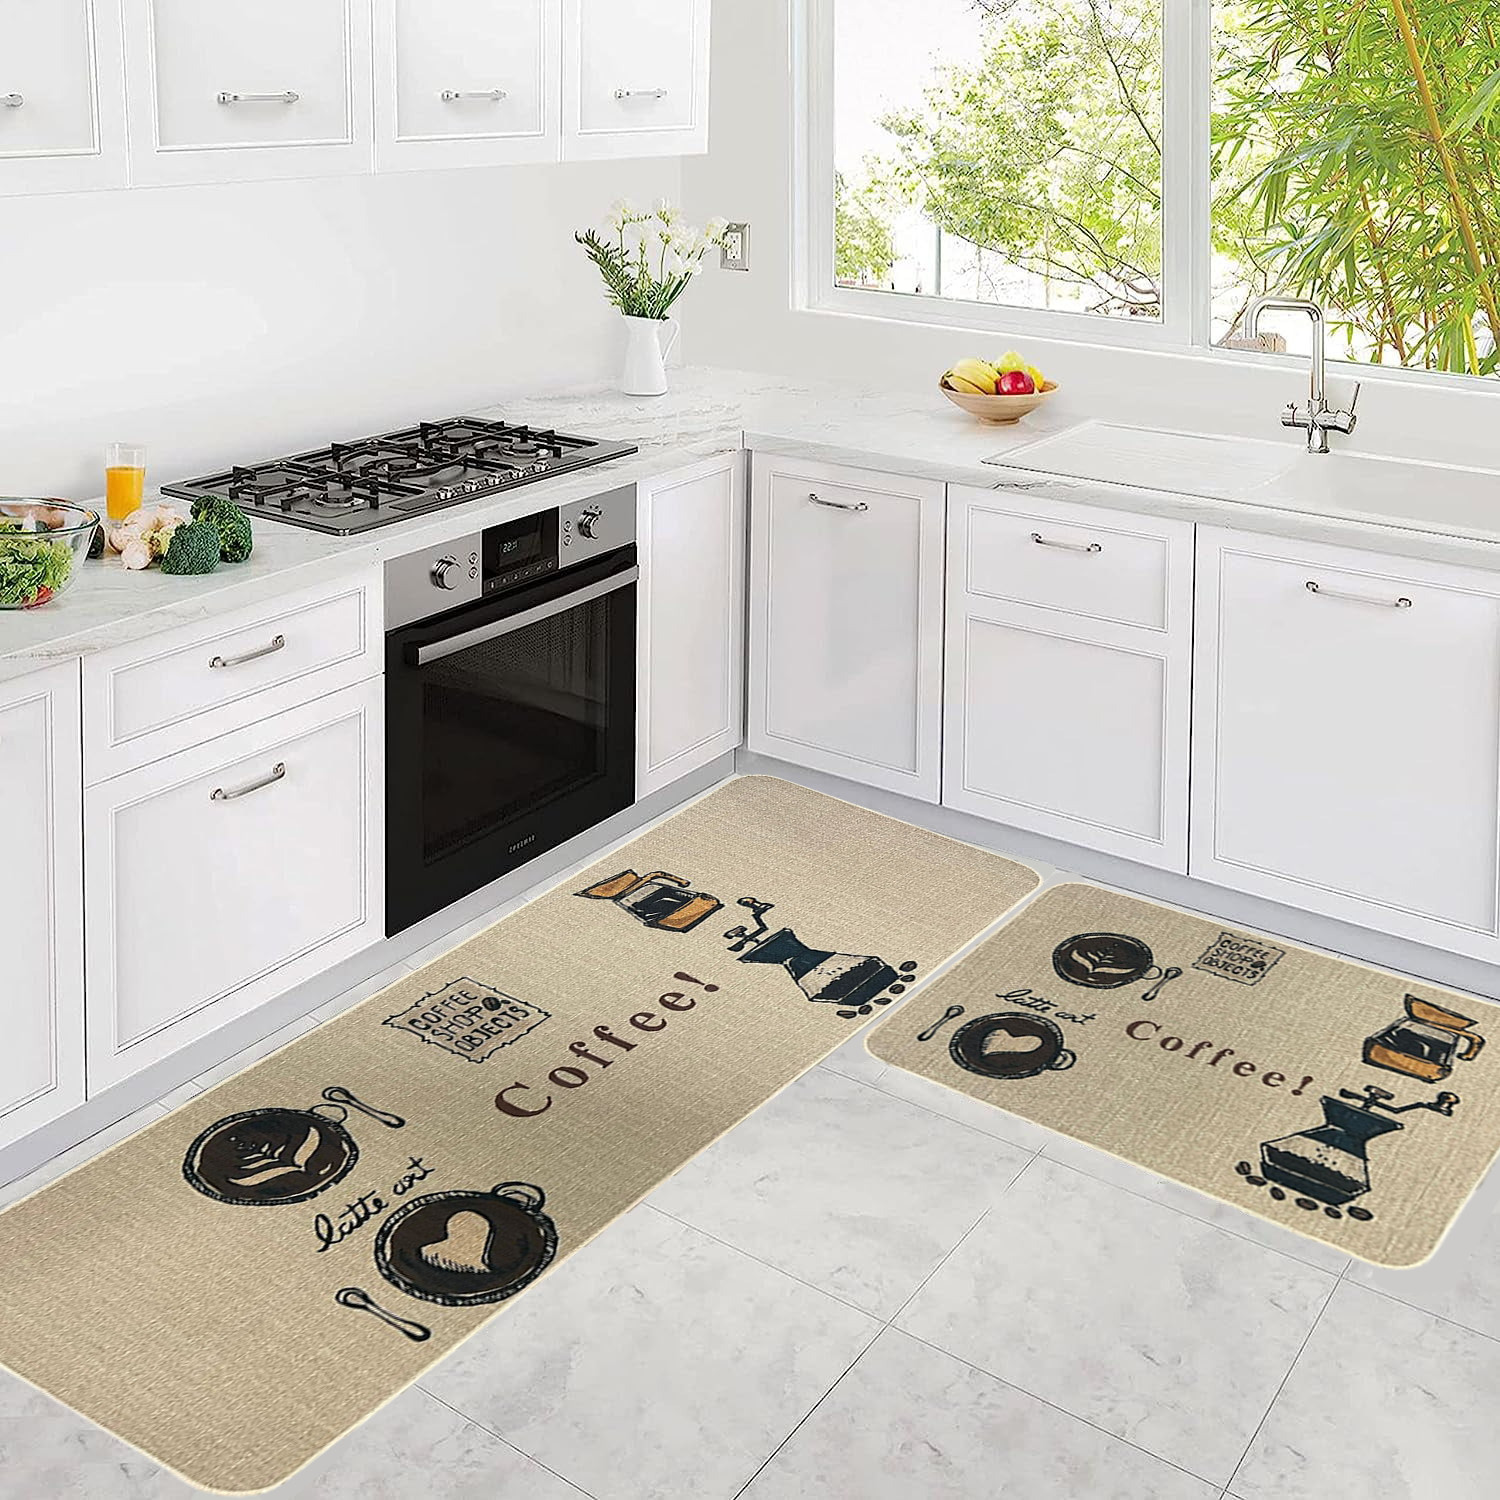 Kitchen Rug Set, 2 Pieces Kitchenware Style Non Slip Kitchen Mat, Easy to Clean Comfort Standing Mats for Kitchen, Home, Office,Laundry